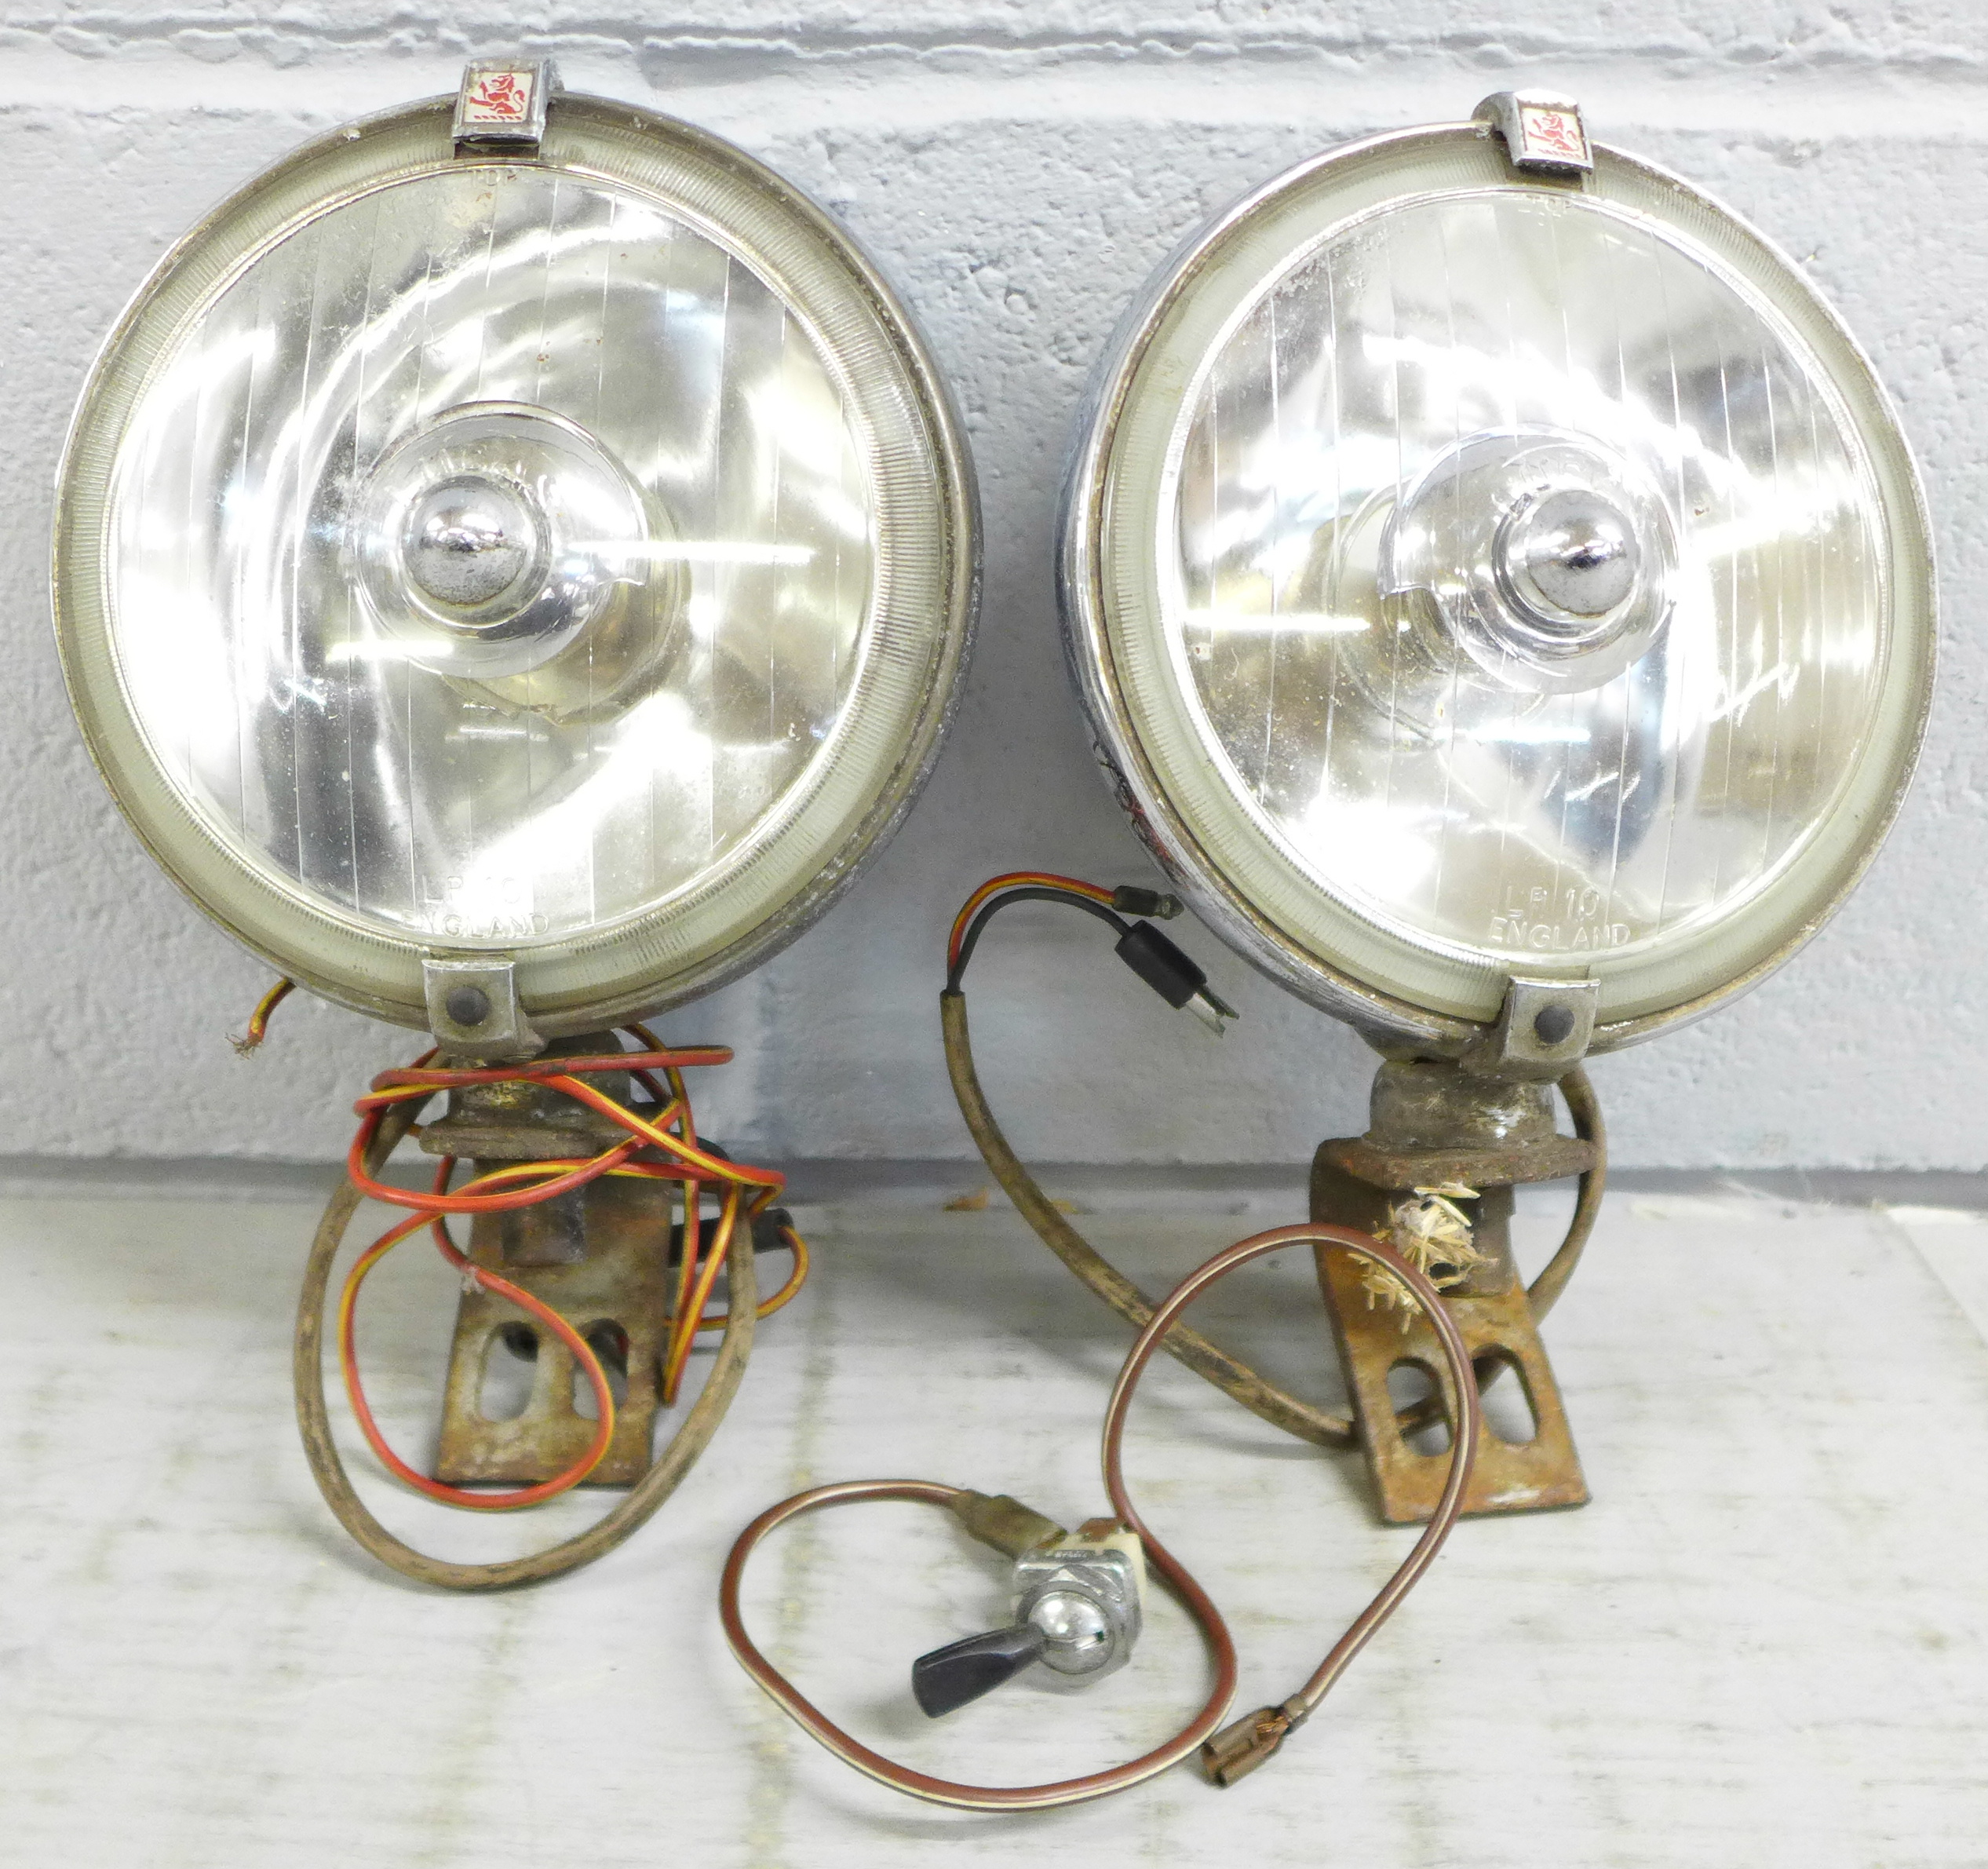 A pair of Lucas LR10 car spotlights and switch